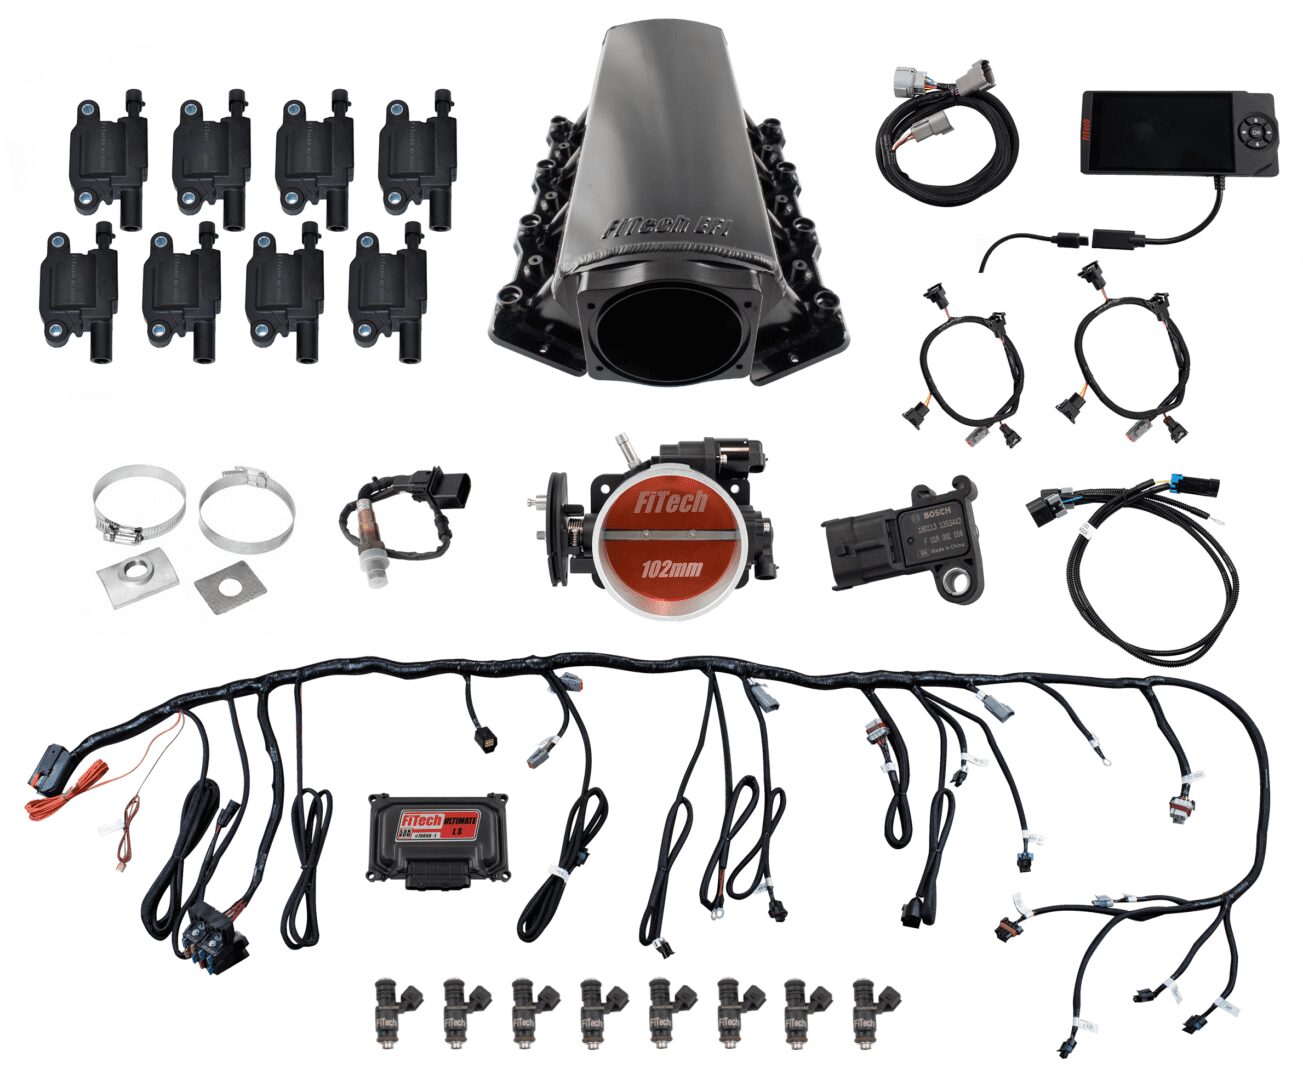 FiTech 78009 Ultimate LS Truck Kit (750 HP/Trans Control/Tight-Fit In-Tank/Cathedral Port)